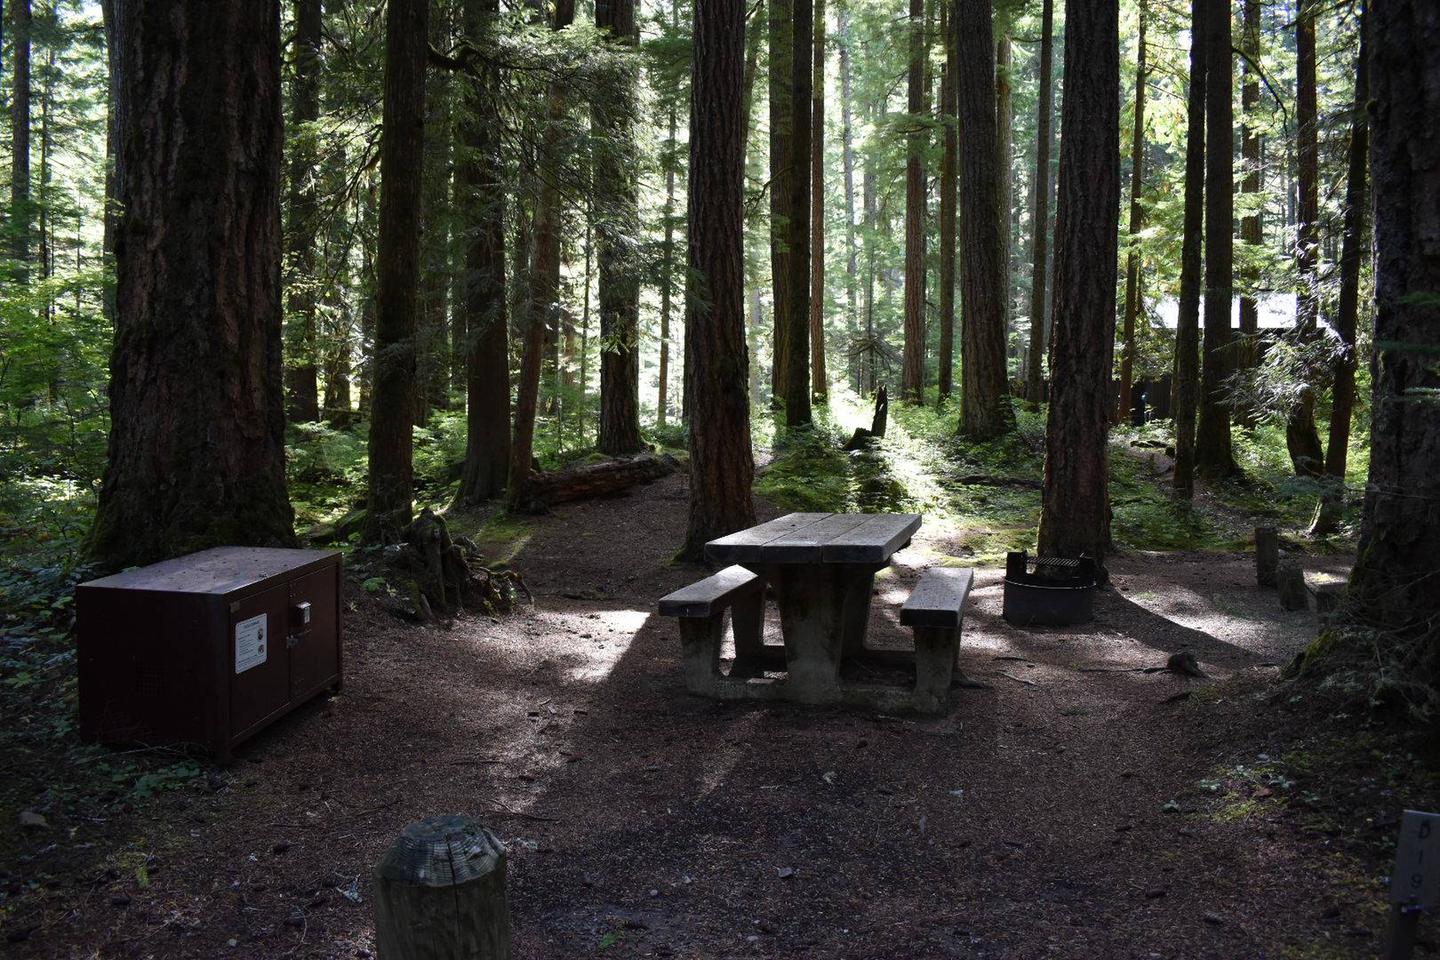 Ohanapecosh Campground - Site D019 AmenitiesCampers are provided with a picnic table, food storage box, and fire pit.